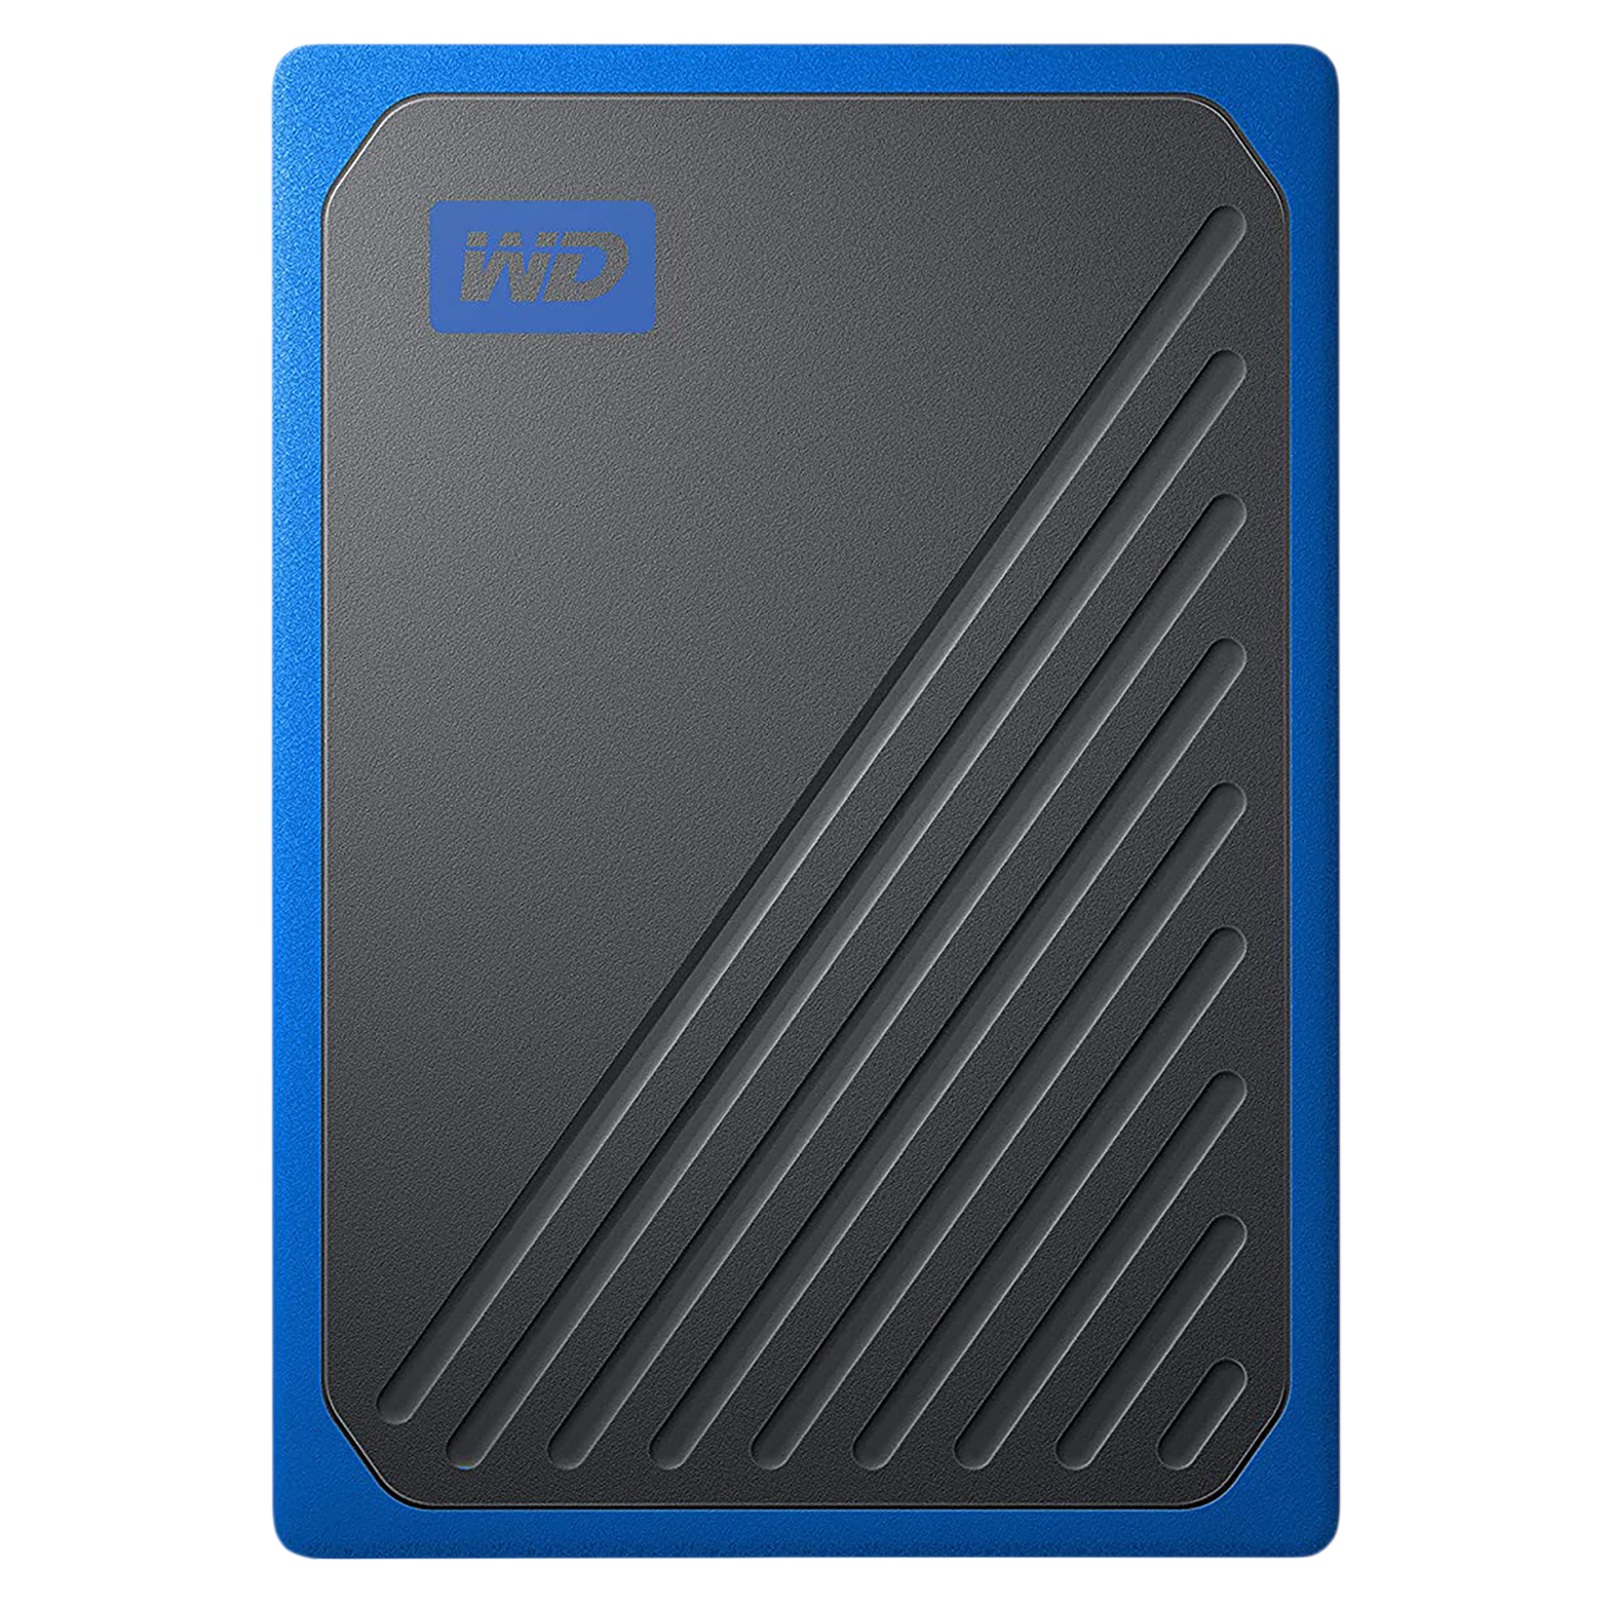 Western Digital My Passport Go 500GB USB 3.0 Solid State Drive (Compact and Integrated, WDBMCG5000ABT-WESN, Black/Cobalt Trim)